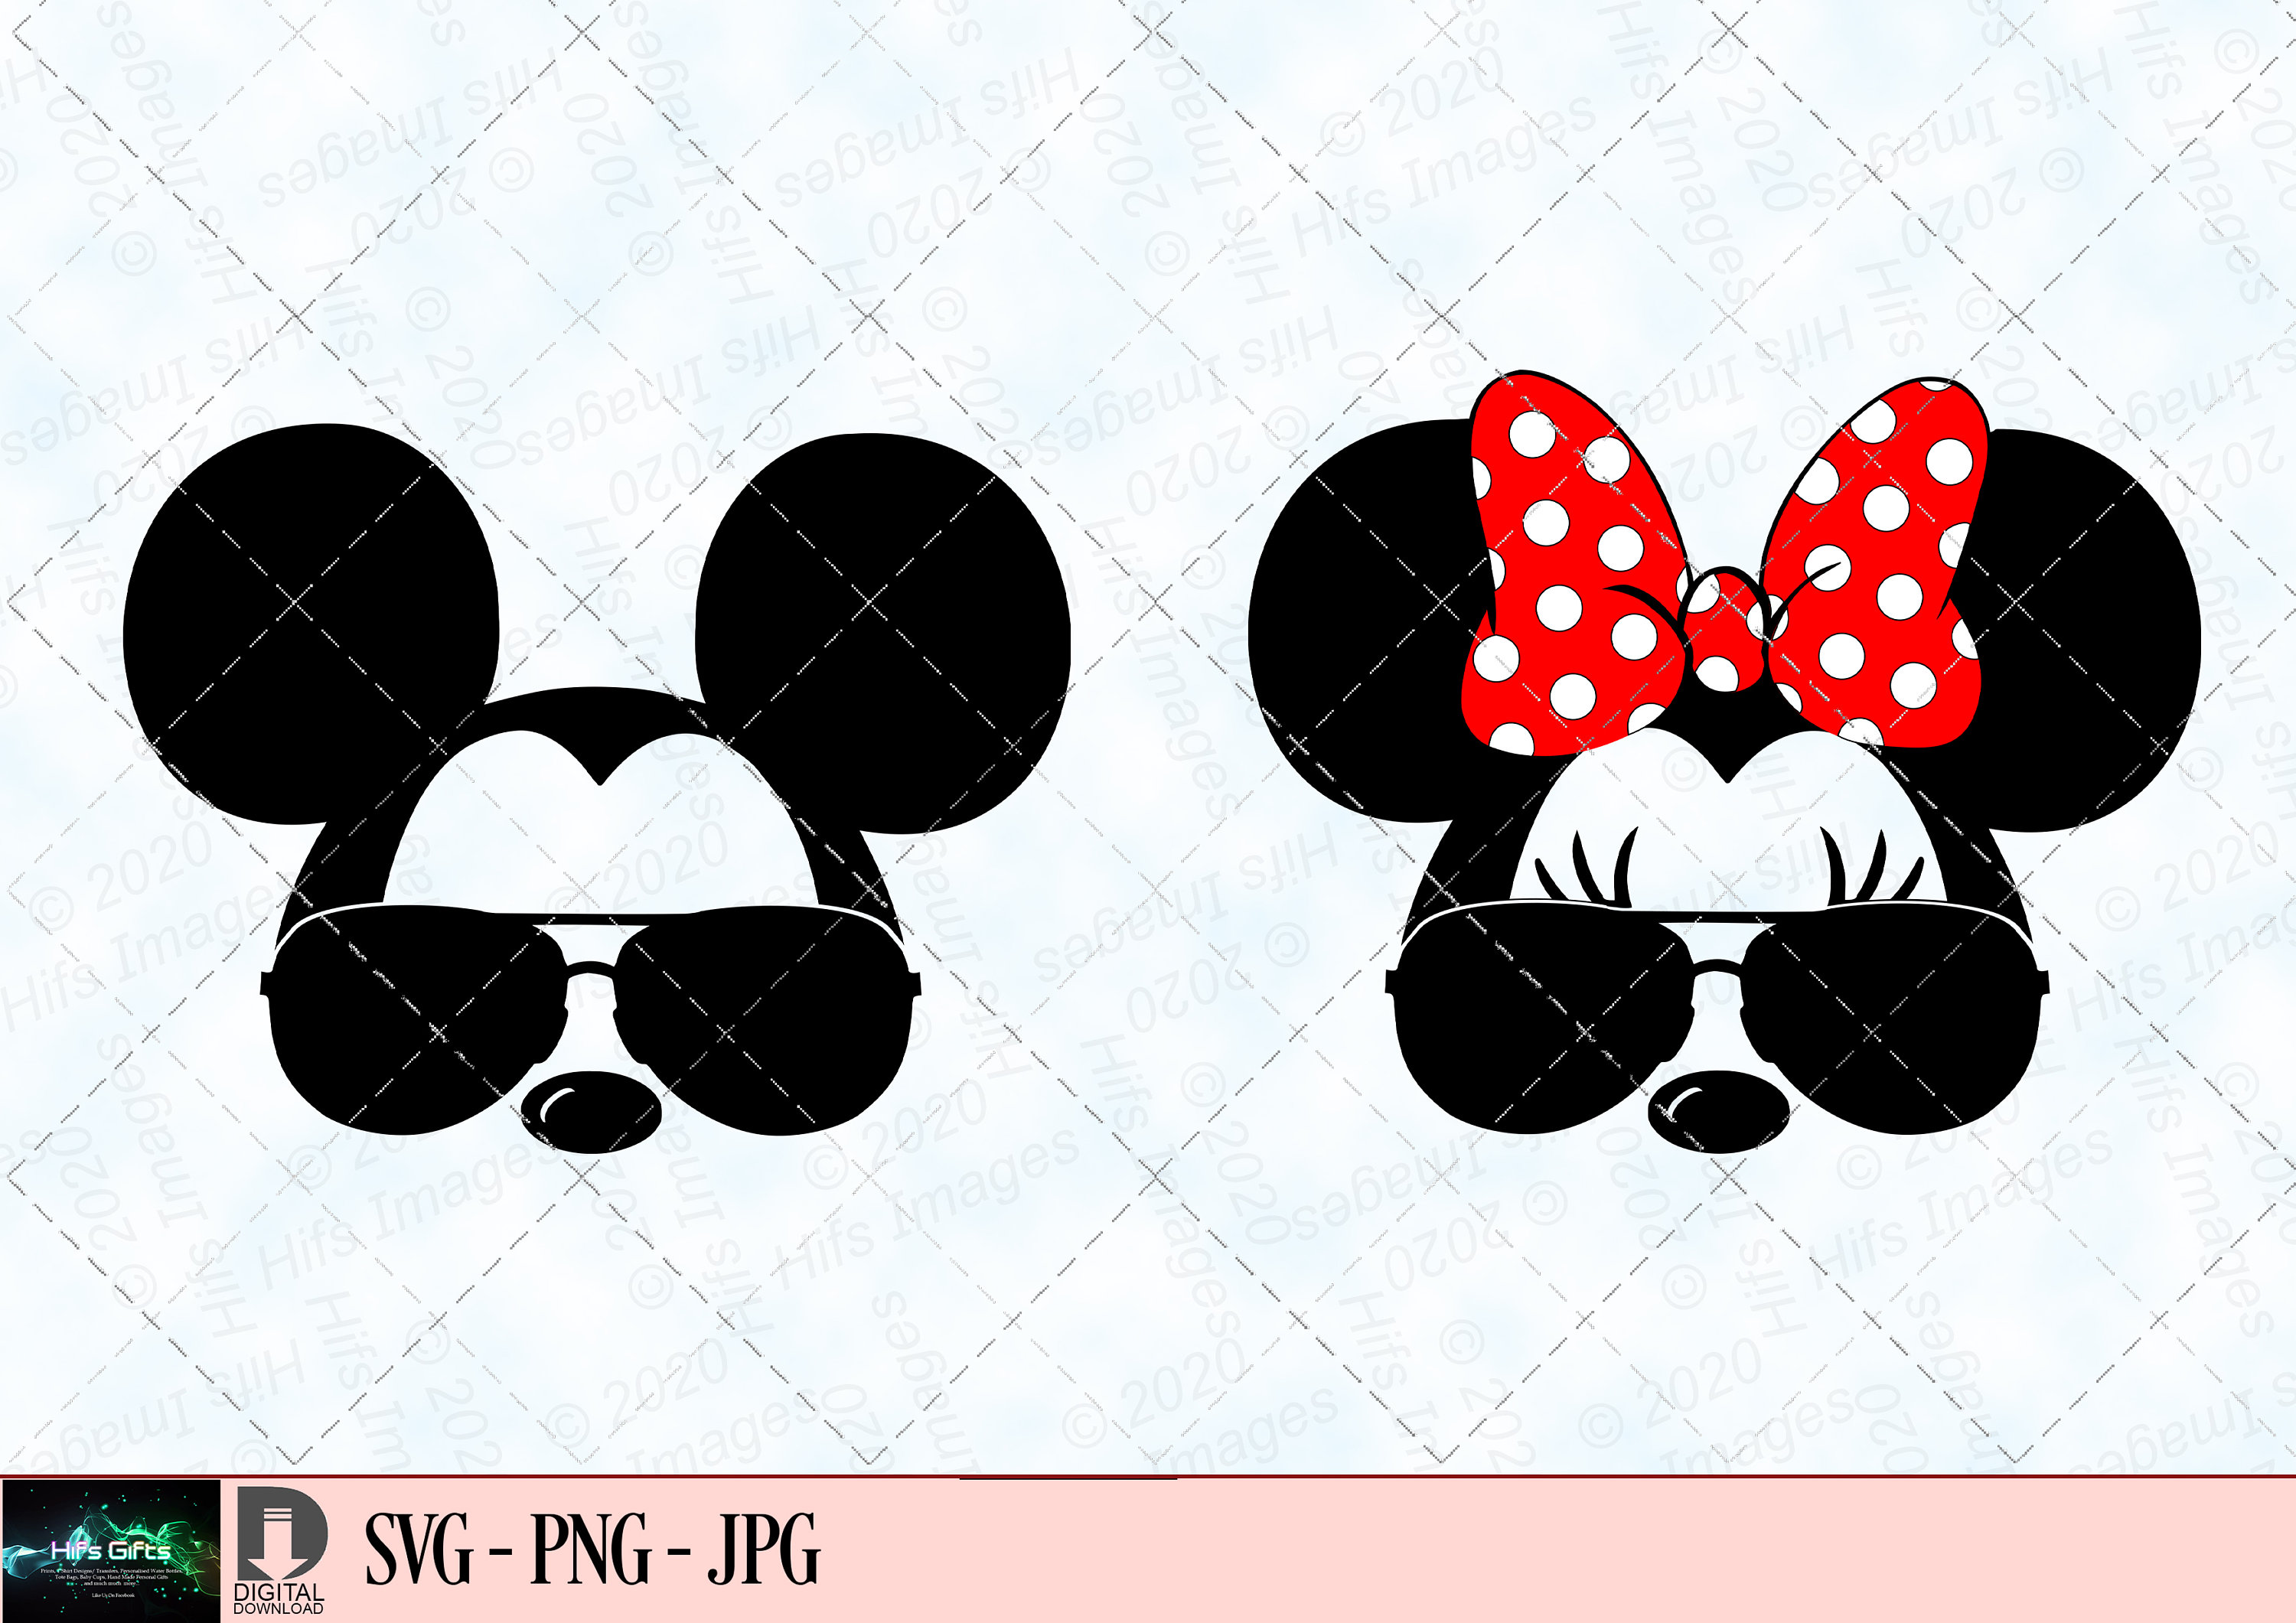 mickey and minnie heads together